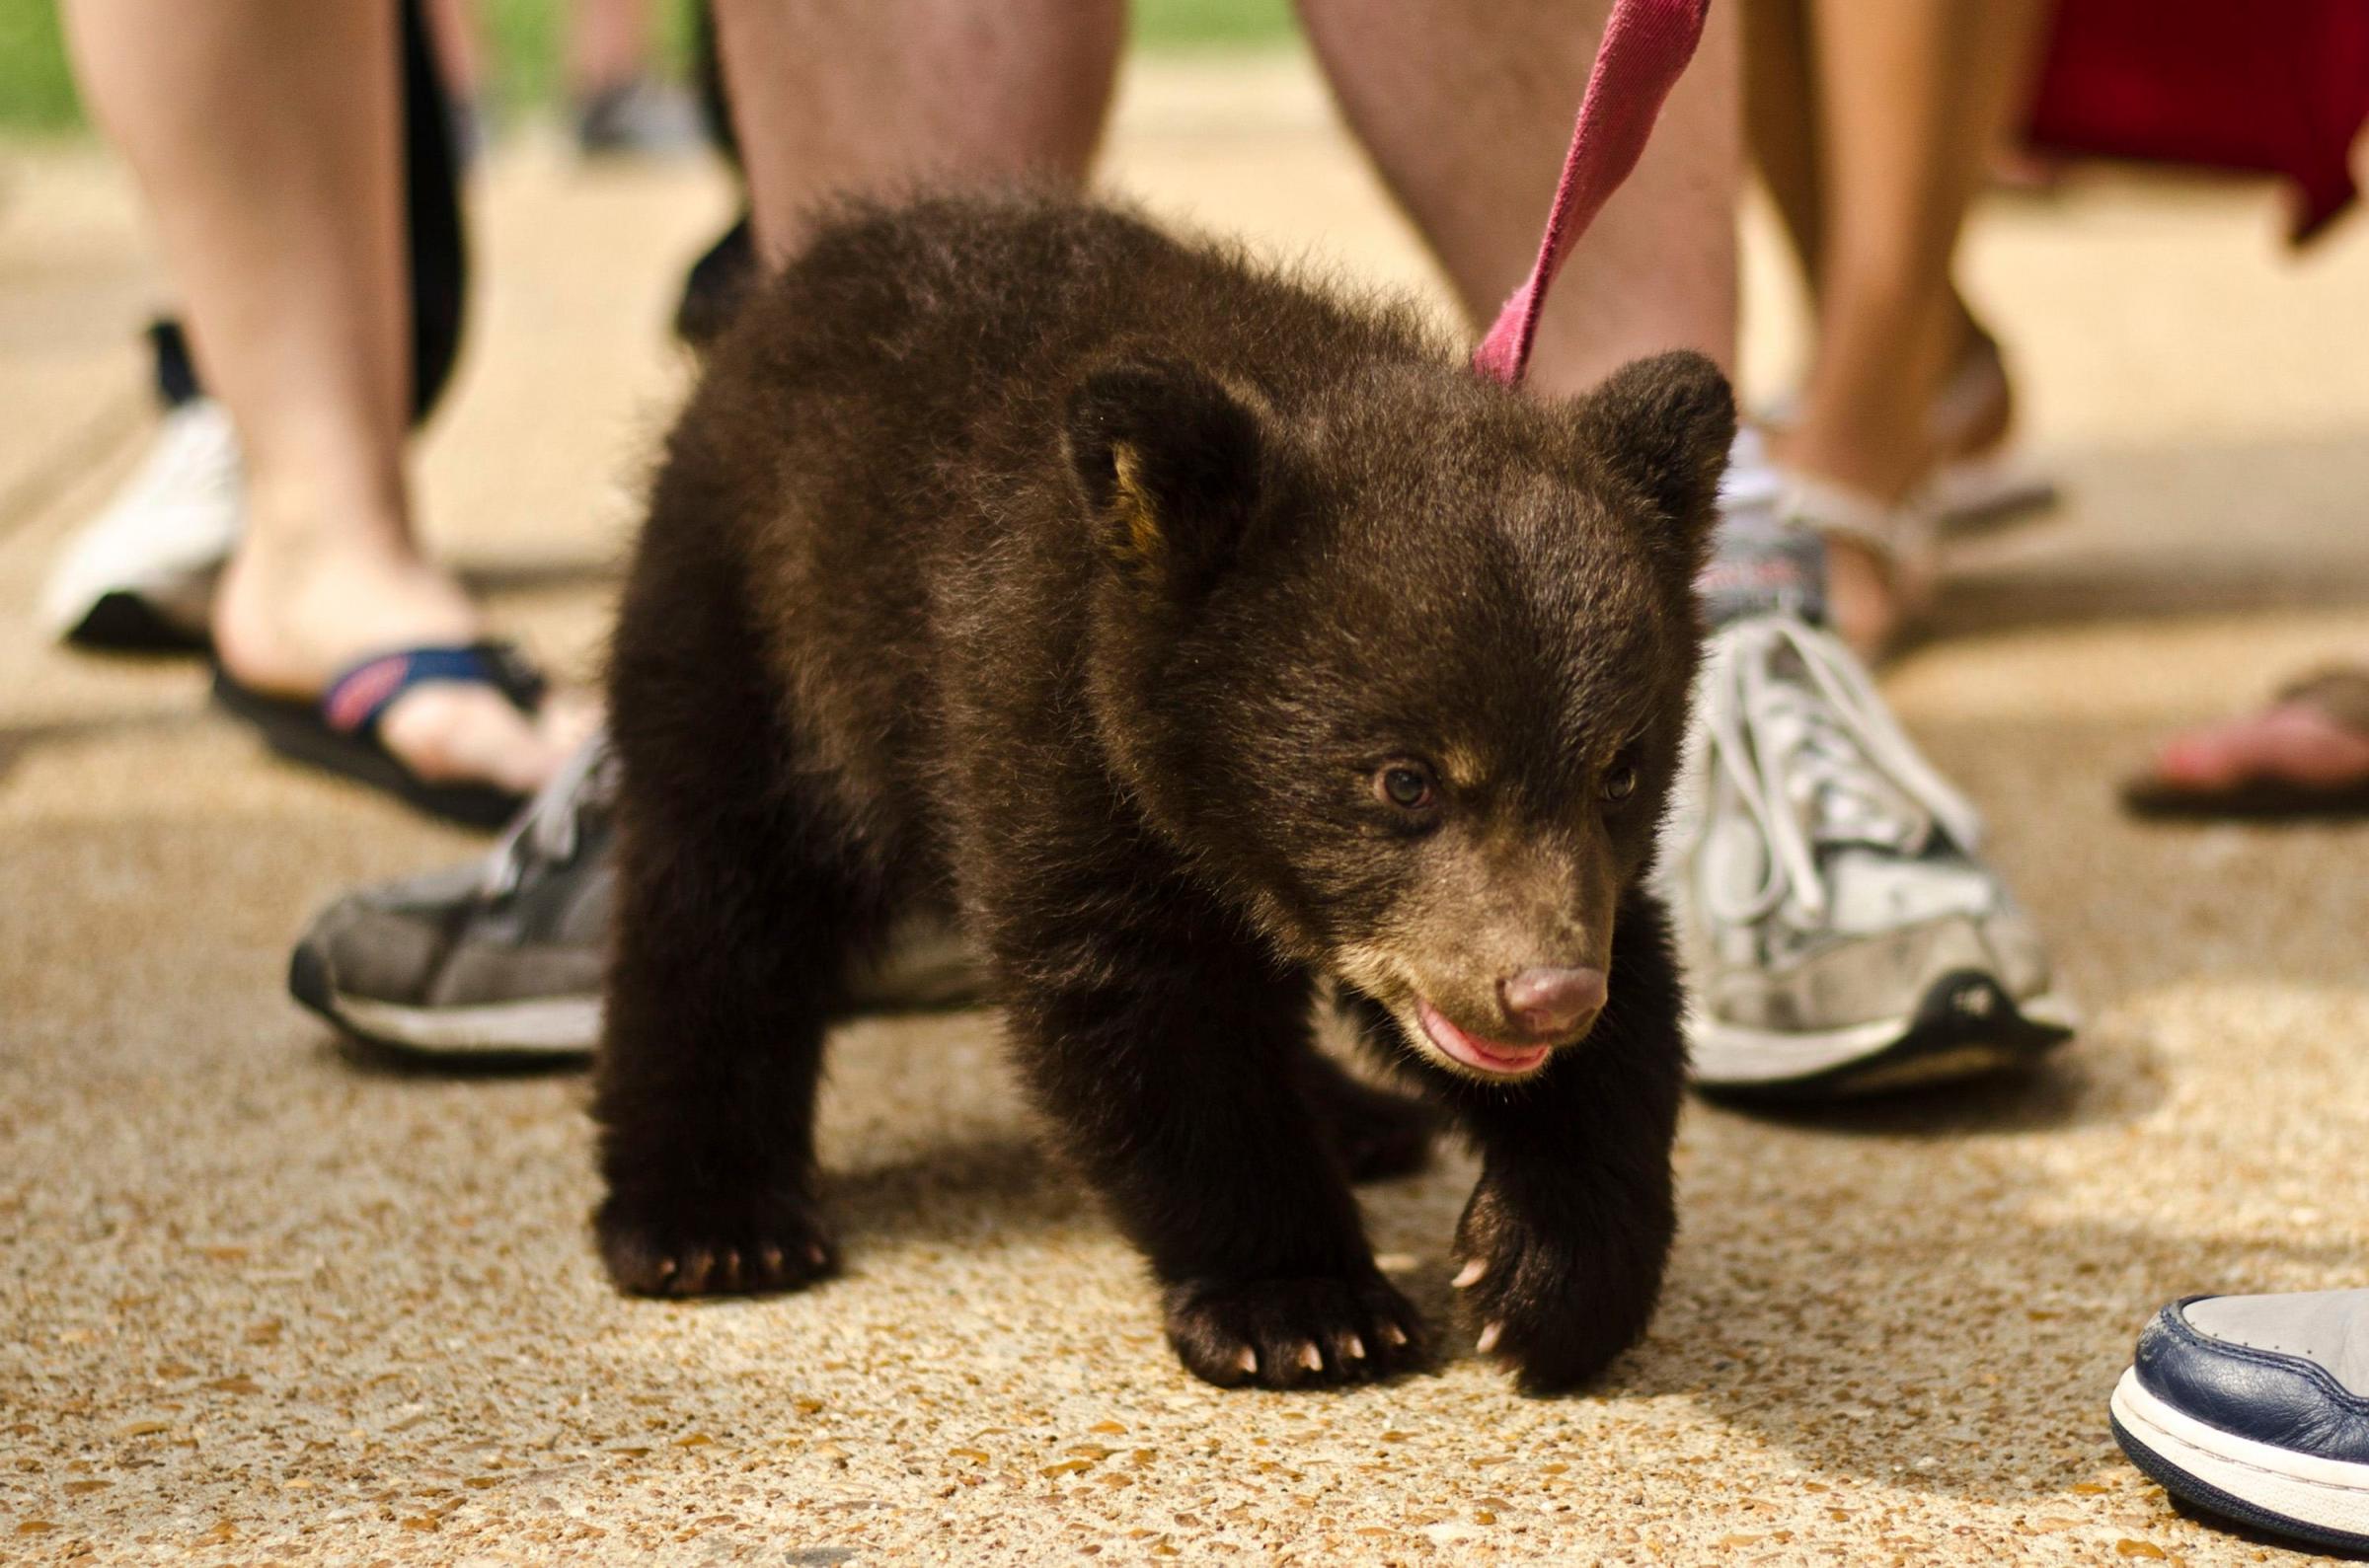 Handout picture of a two-month-old bear cub named Boo Boo led on a leash by a student at Washington University in St. Louis